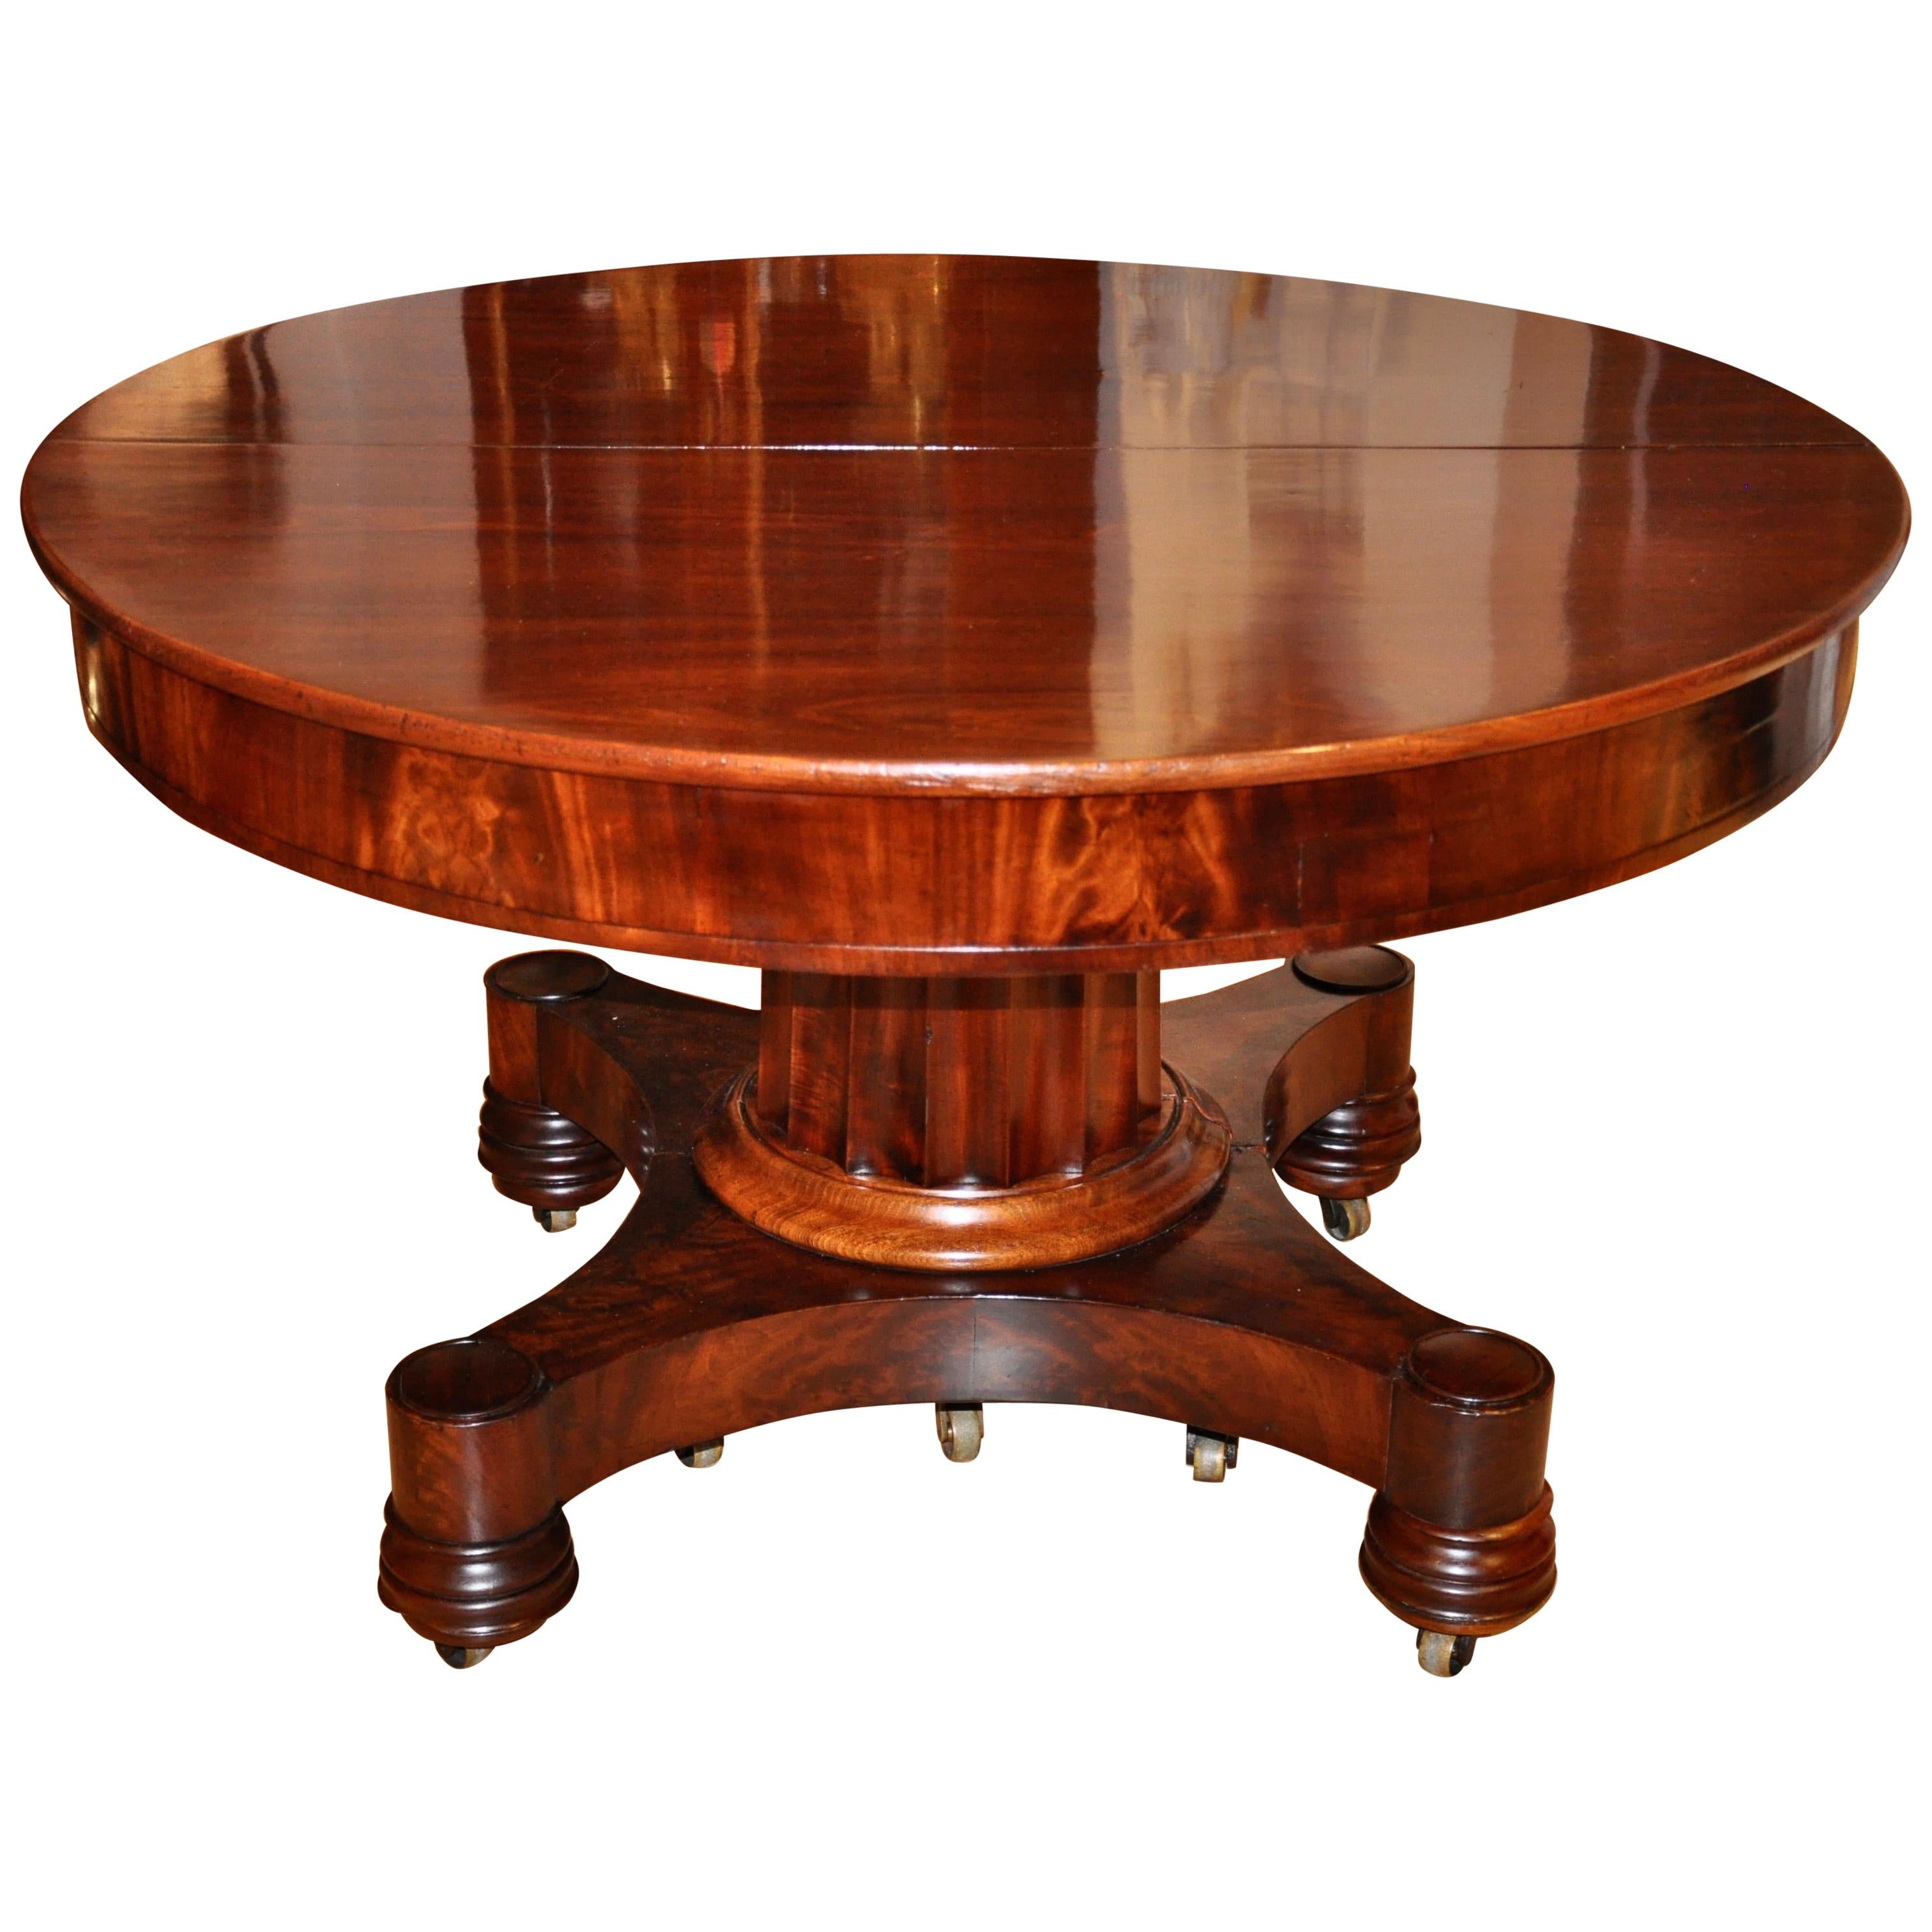 19th Century Boston Late Federal Round Expandable Dining Table by Briggs